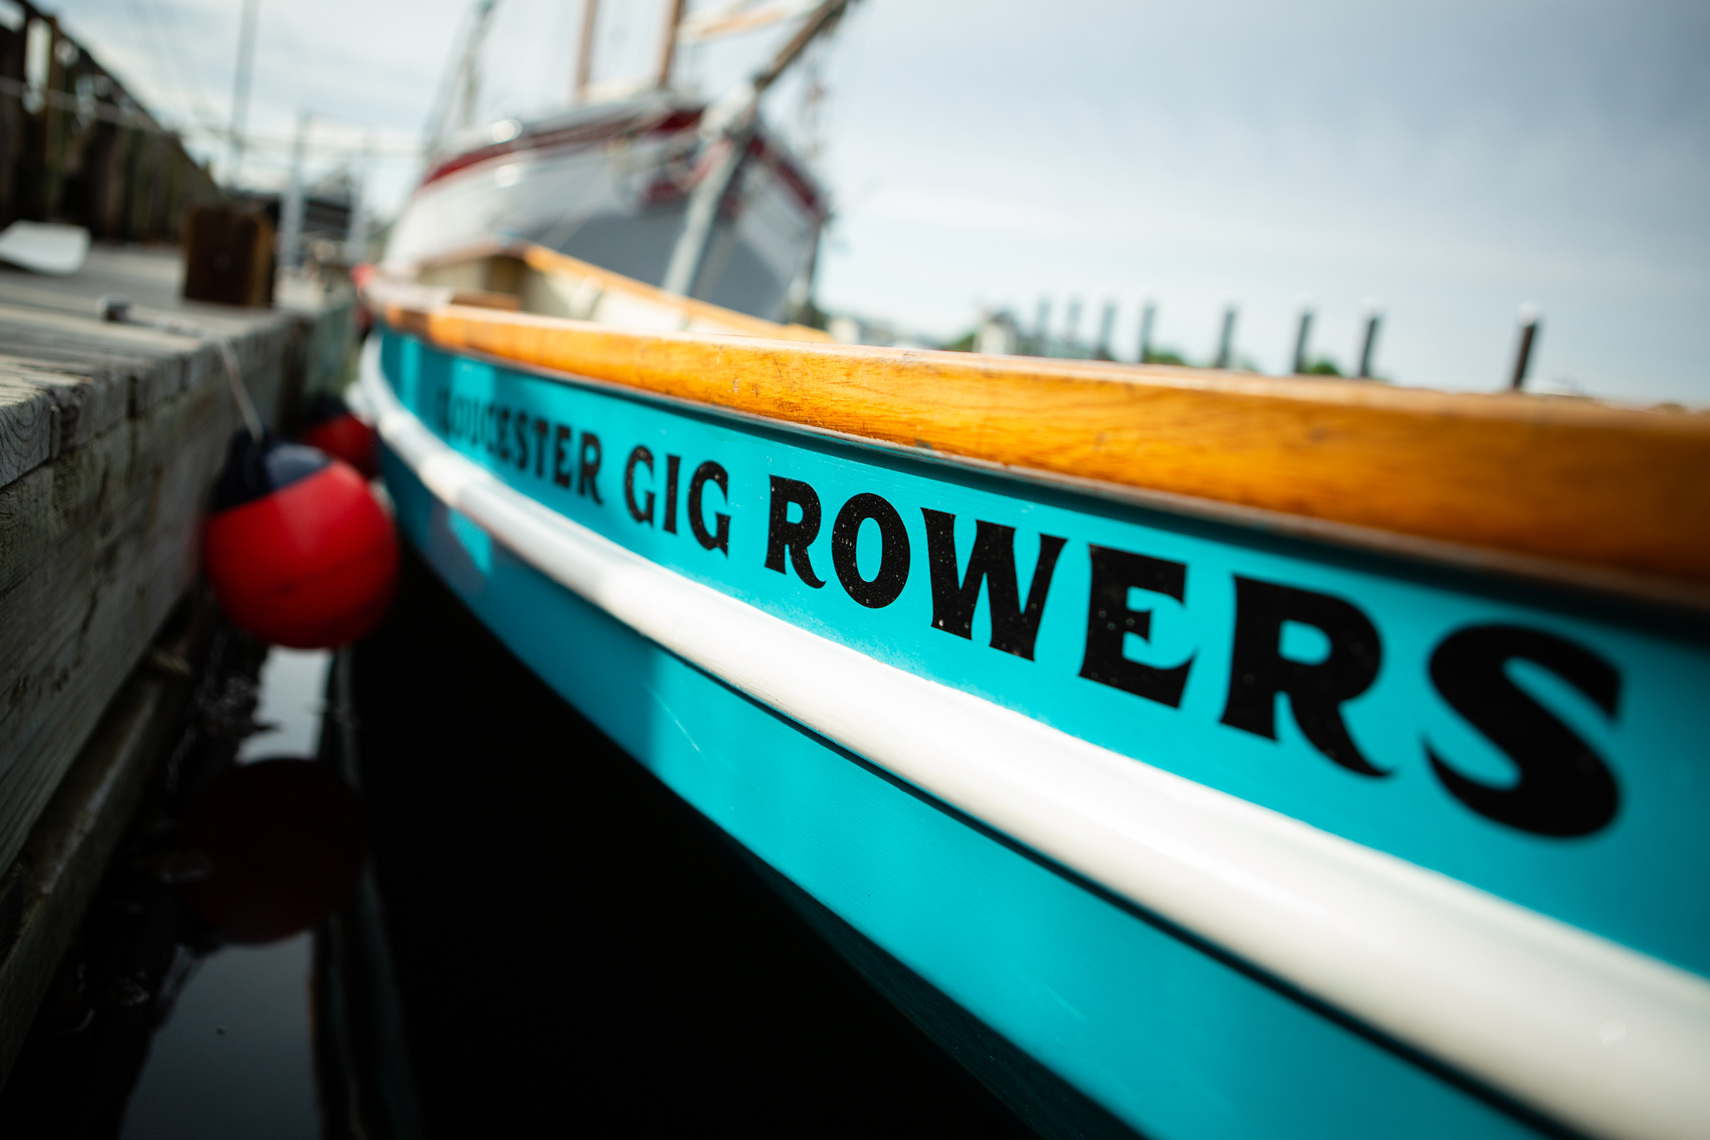 GLOUCESTER GIG BOAT ROWERS • THE OTHER CAPE • JASON GROW PHOTOGAPHY